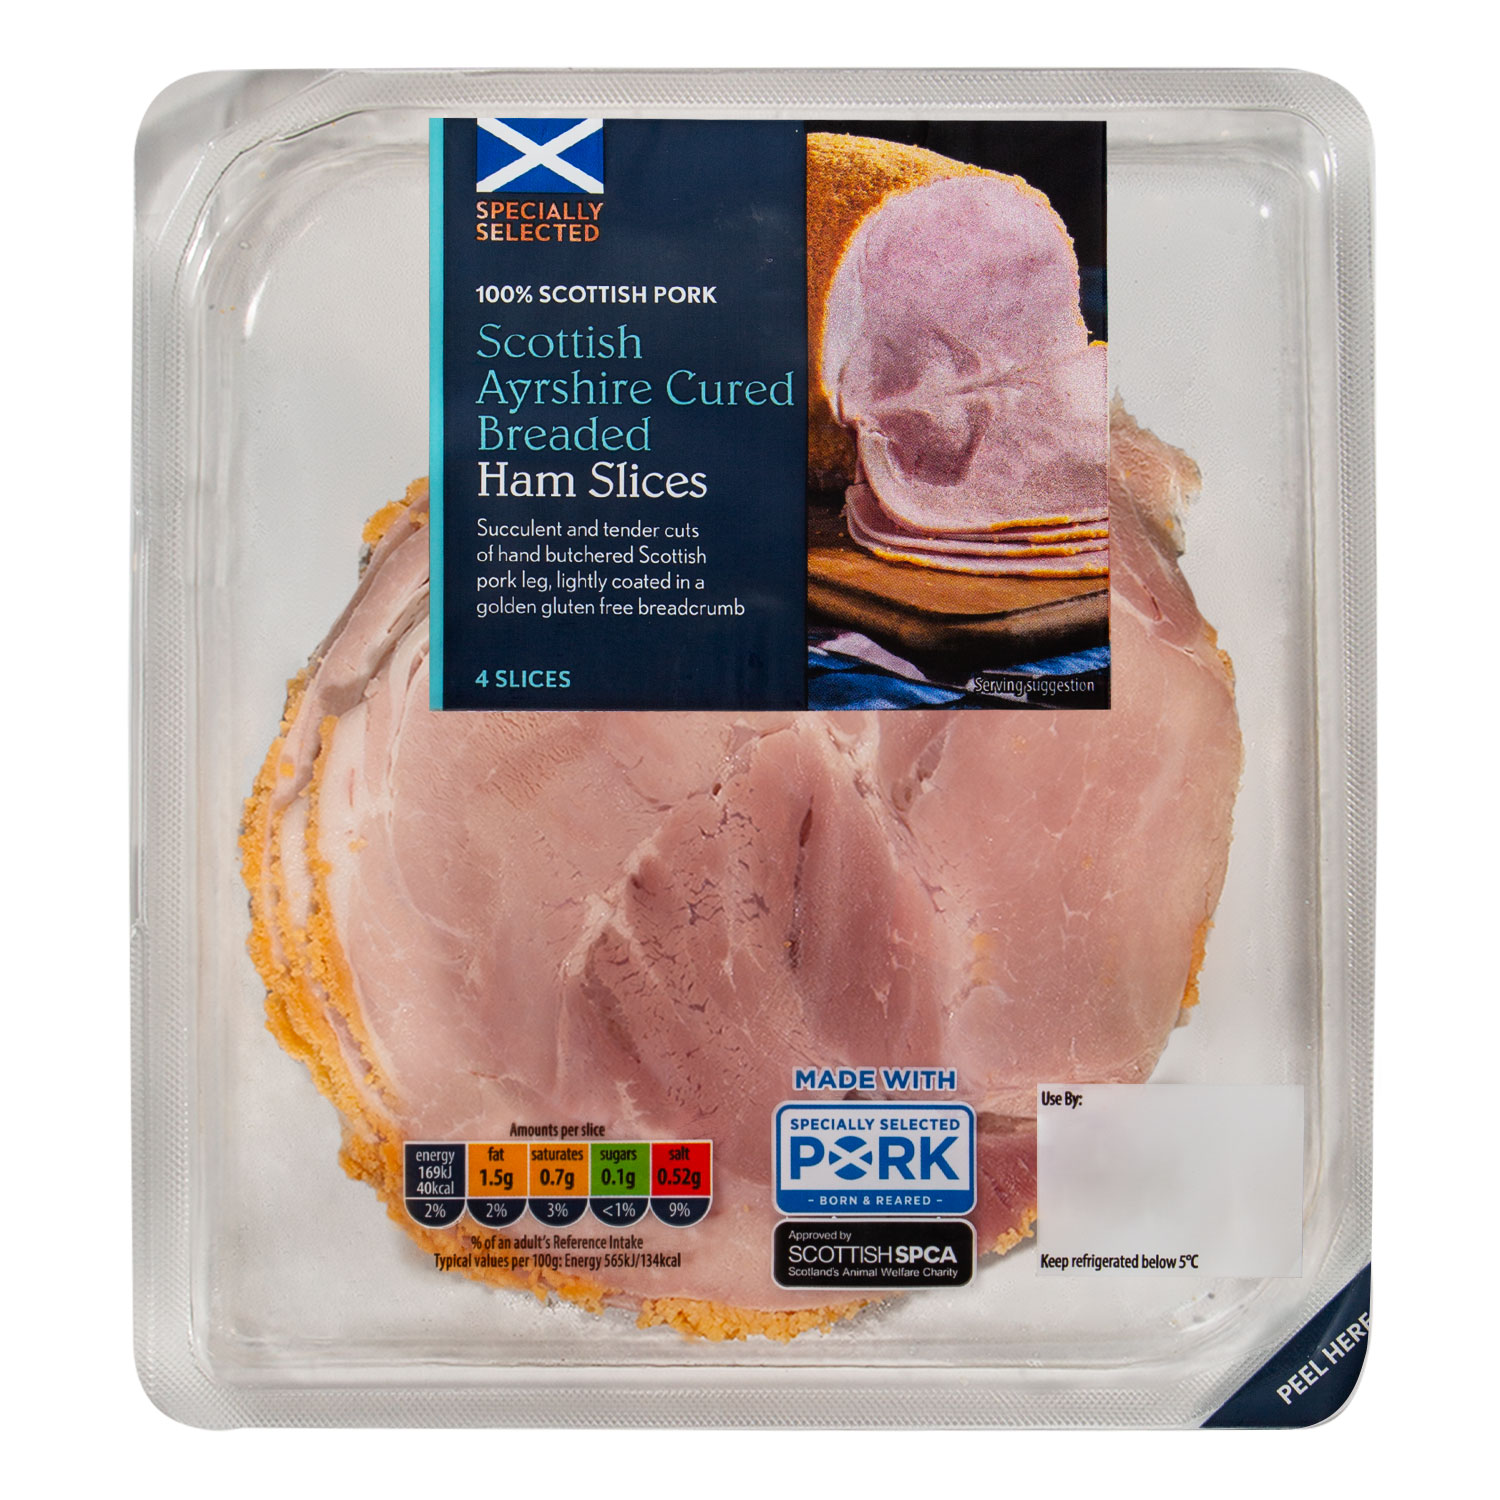 Specially Selected Scottish Ayrshire Cured Breaded Ham Slices 120g